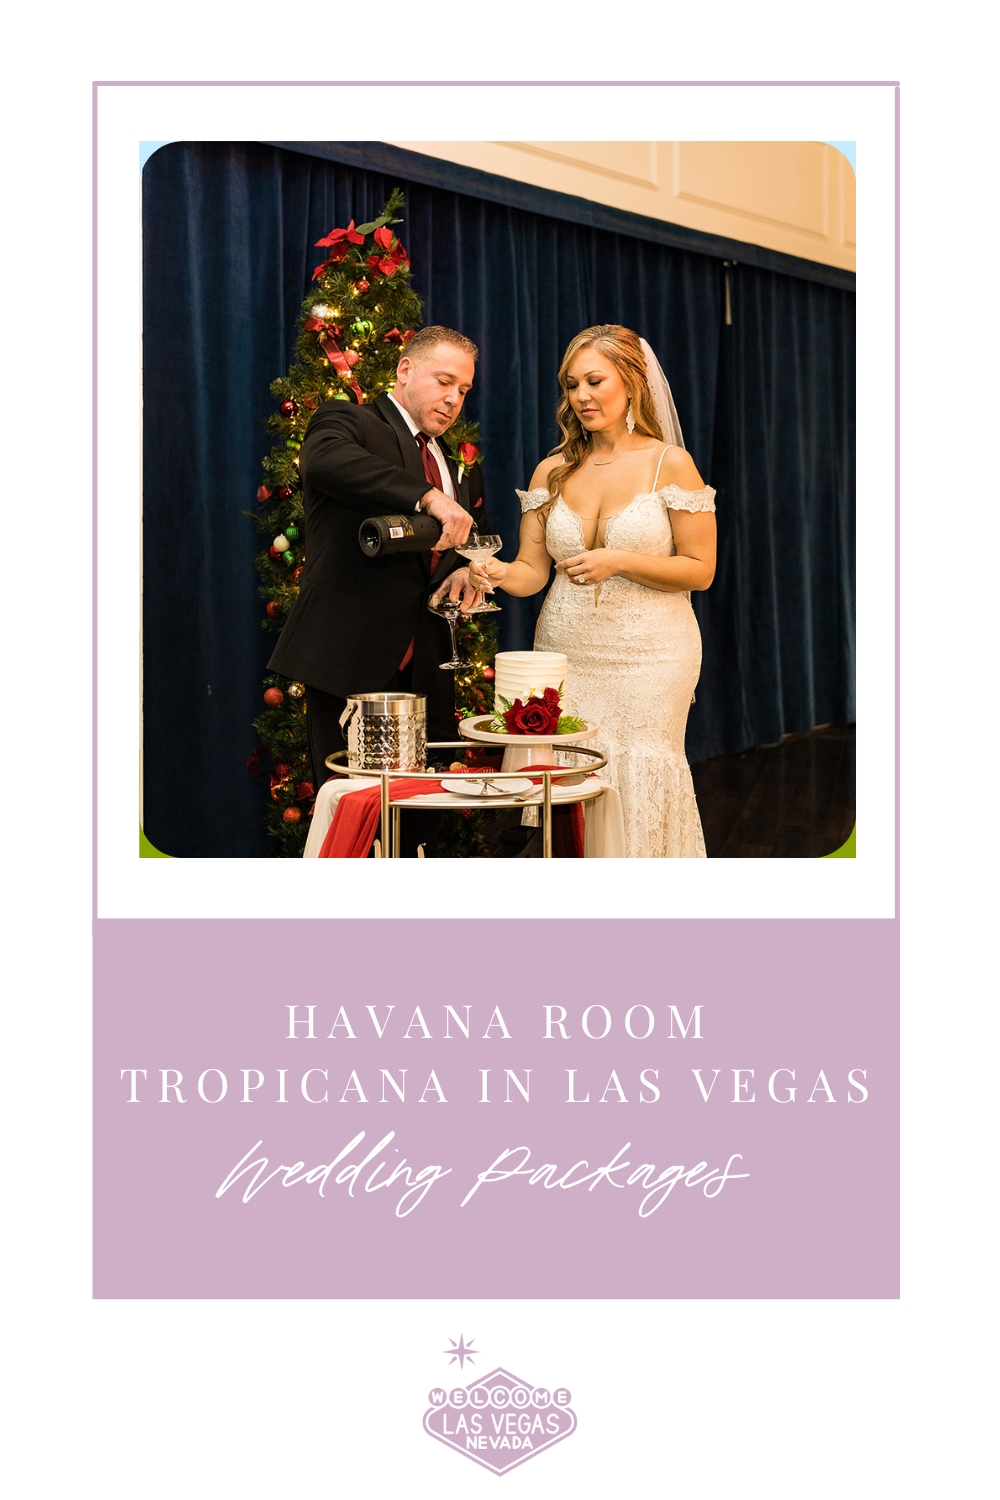 Groom pouring champagne on bride's glass with their cake in front of them; image overlaid with text that reads Havana Room Tropicana In Las Vegas Wedding Packages